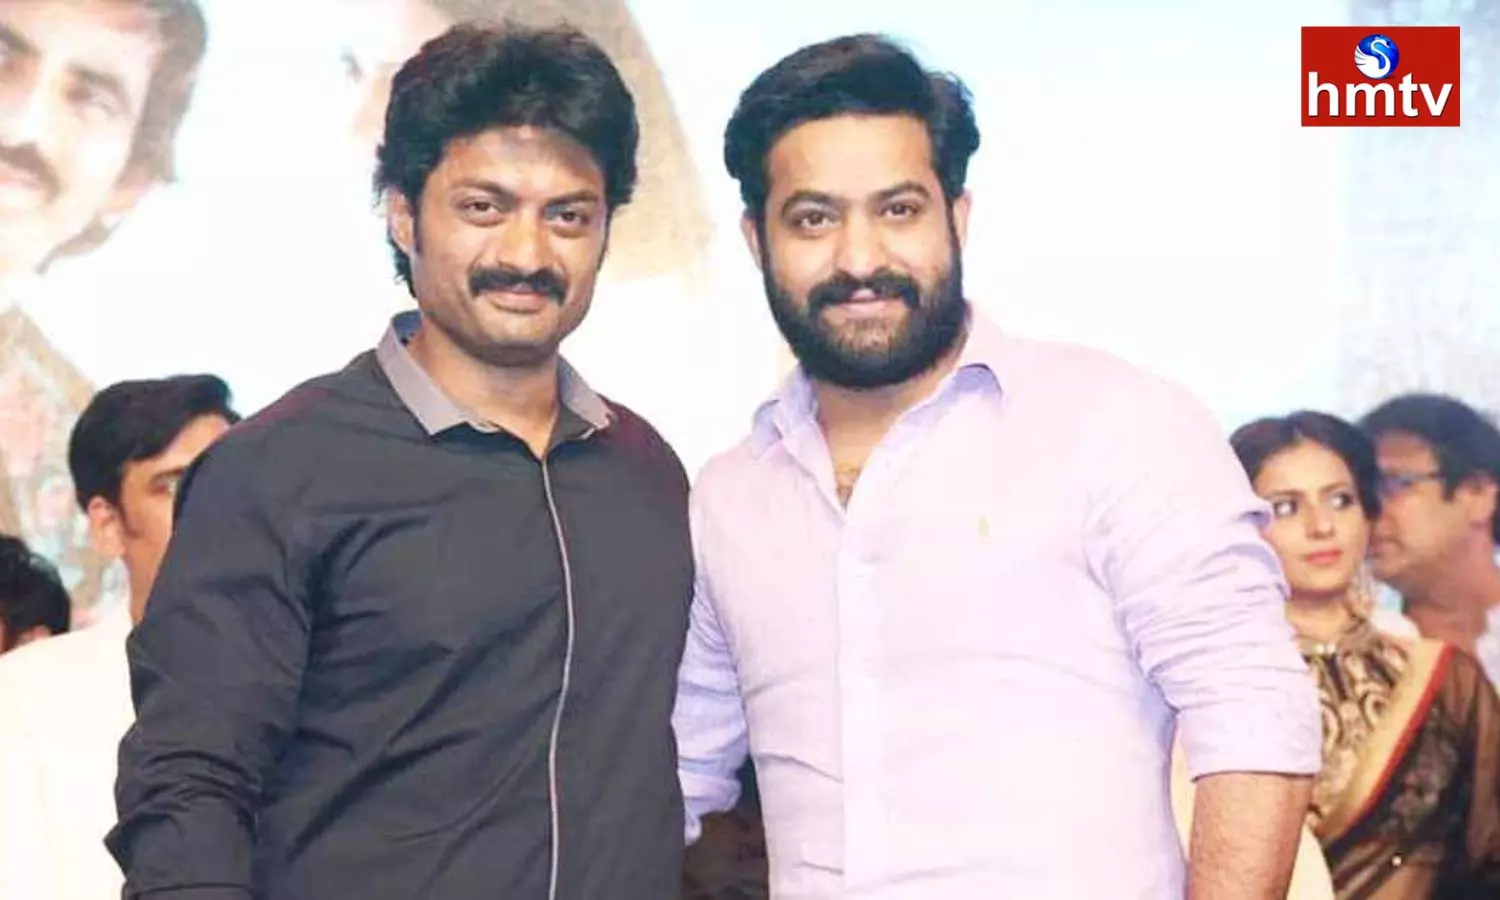 NTR Came Forward To Support His Elder Brother